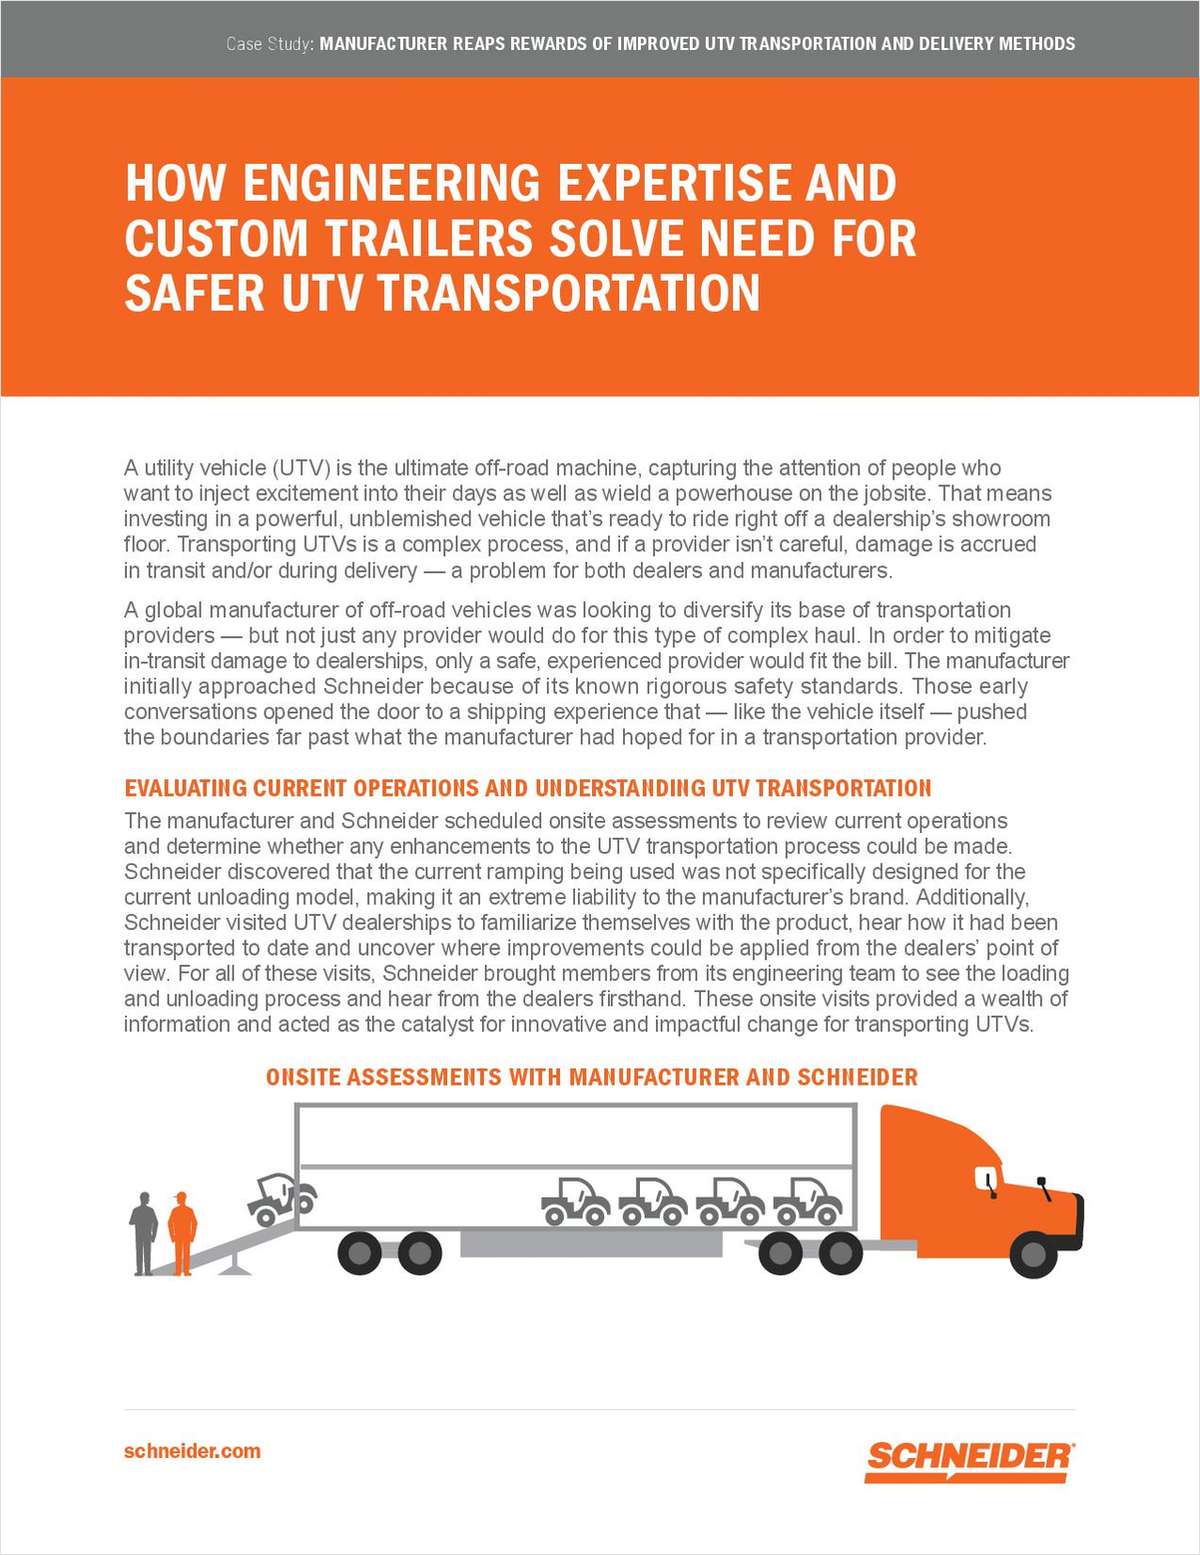 How One UTV Manufacturer Reduced Damages and Optimized their Supply Chain with Innovative, Custom Transportation